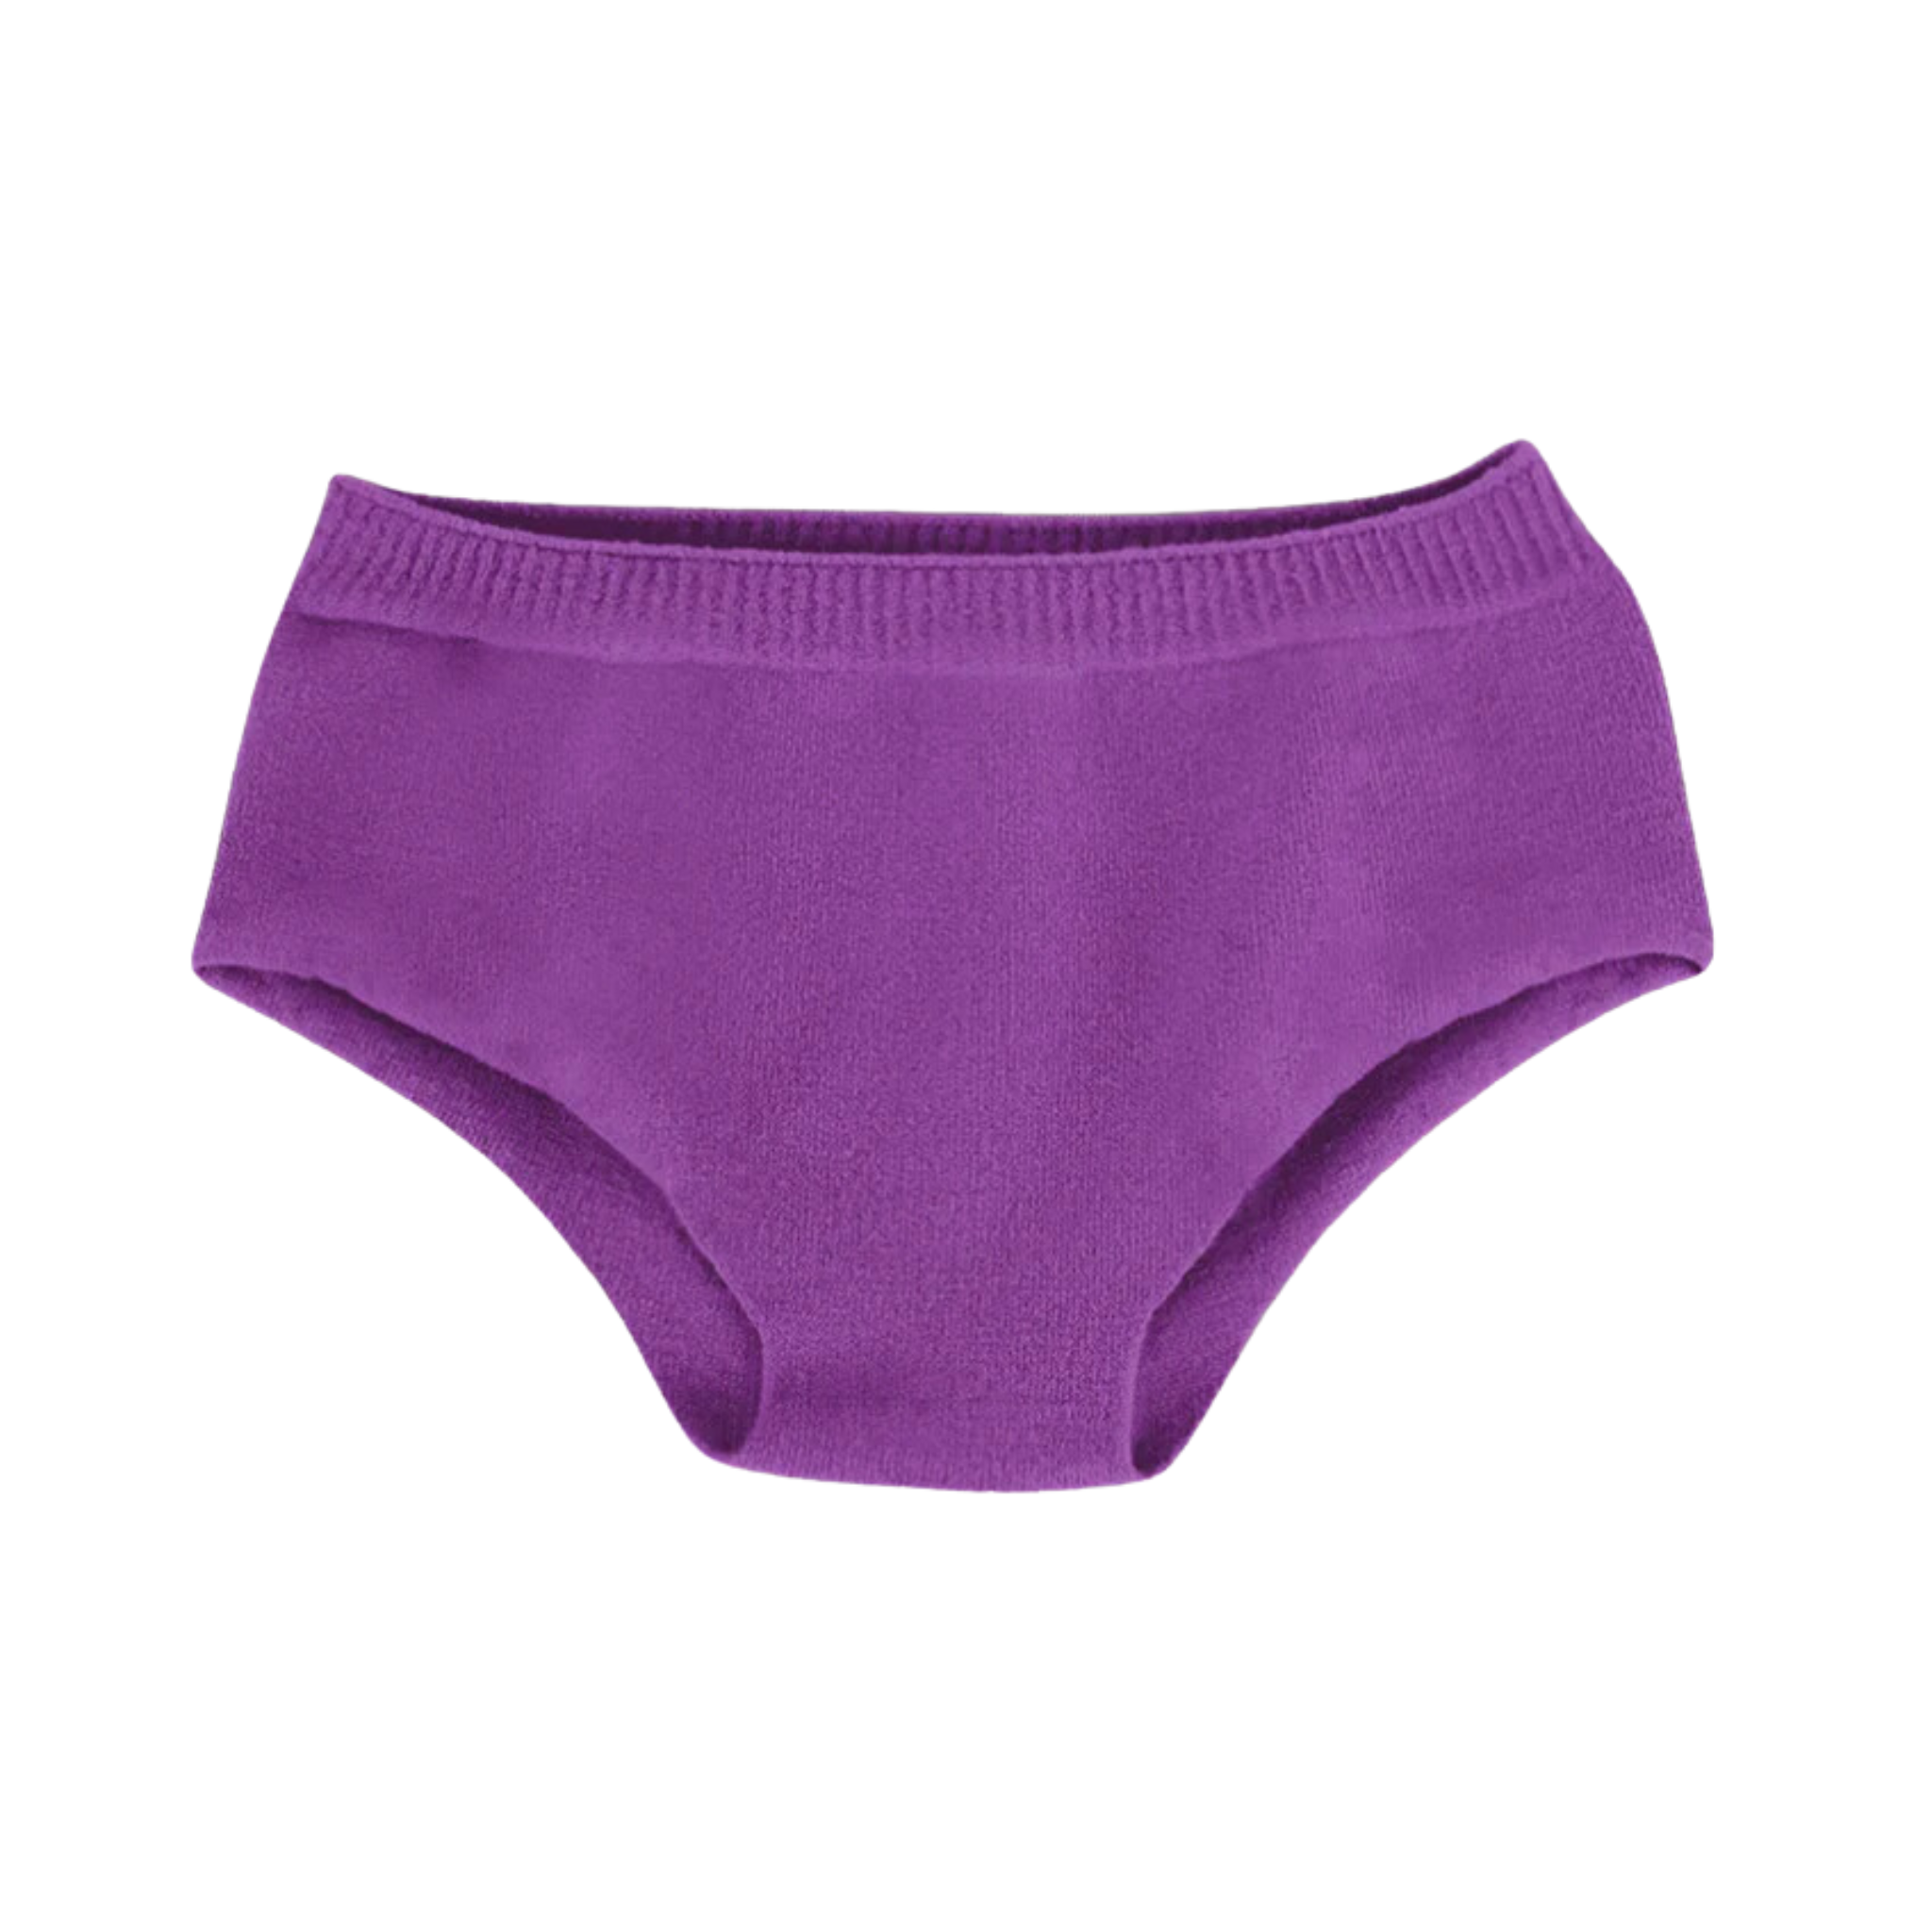 SmartKnitKIDS - Seamless Undies for Girls - Multipack Pink/Purple/White  Brief Pants